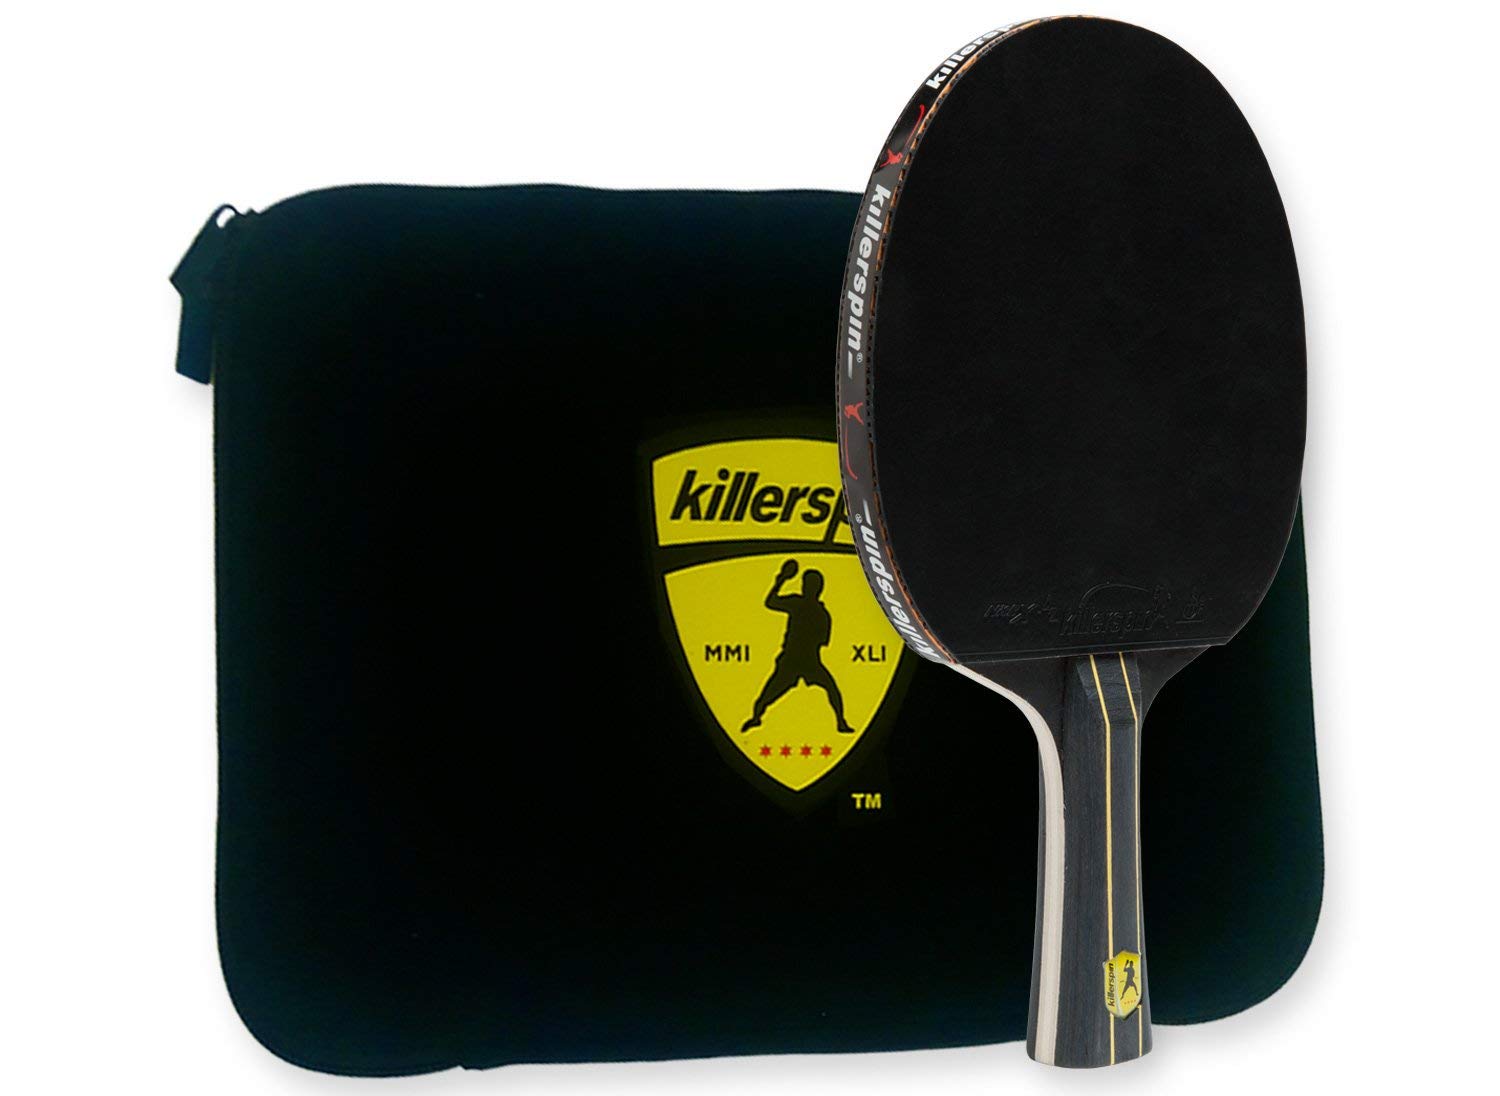 Killerspin Jet Black Ping Pong Racket Combo – Intermediate Table Tennis Bat| 5 Layer Wood Blade, Nitrx-4Z Rubbers, Flare Handle| Competition Ping Pong Racket| Protective Storage Case Sleeve